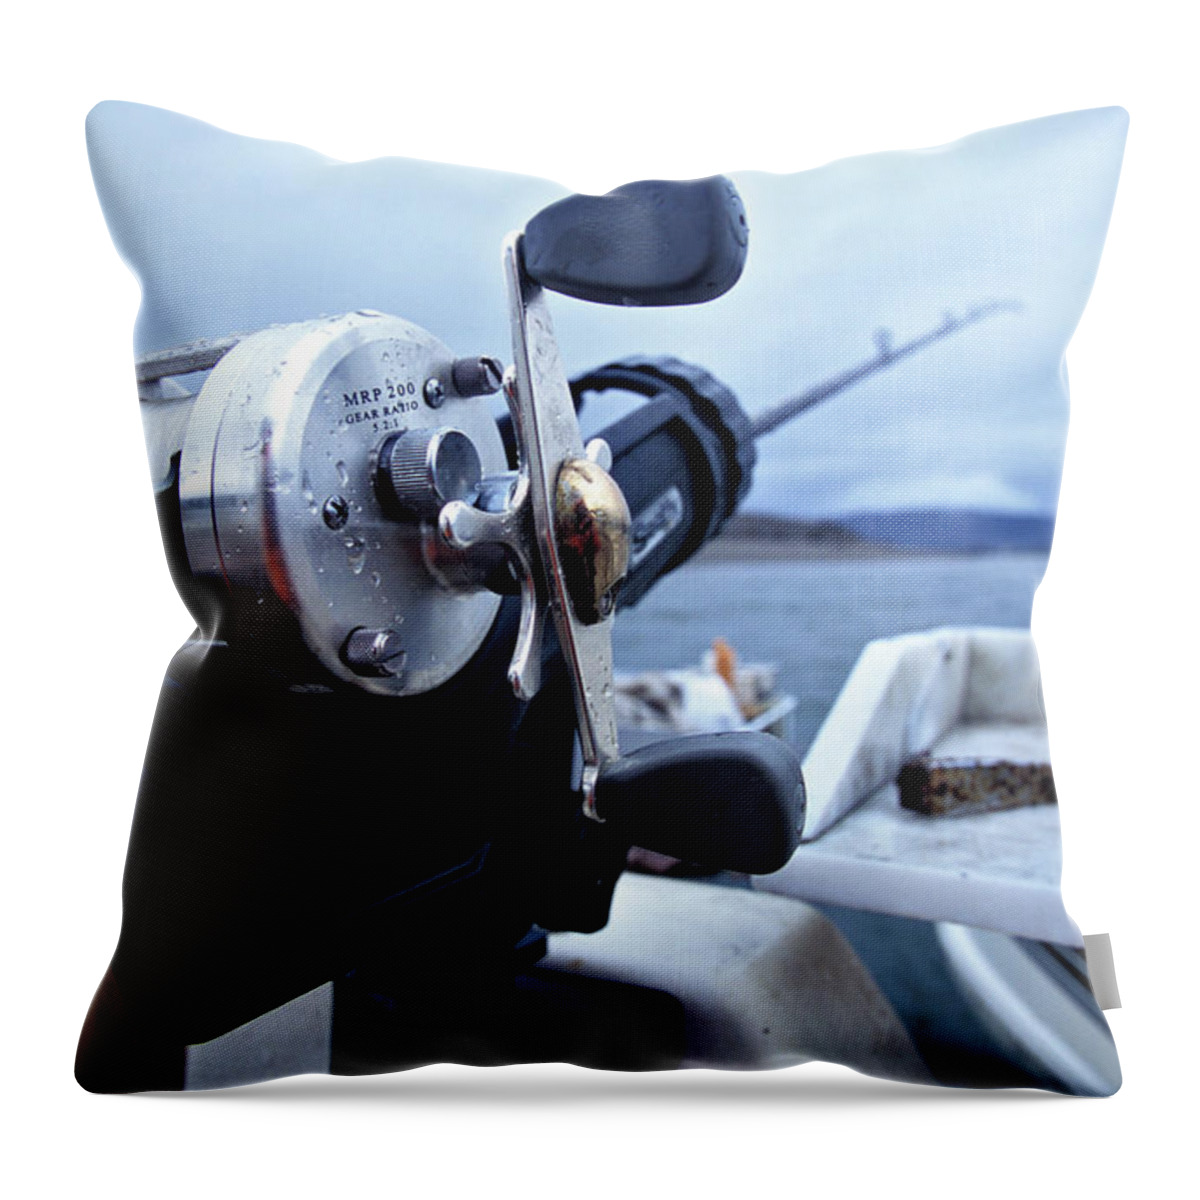 Angling Throw Pillow featuring the photograph Portrait Of Fishing Reel On Boat While by Justin Bailie